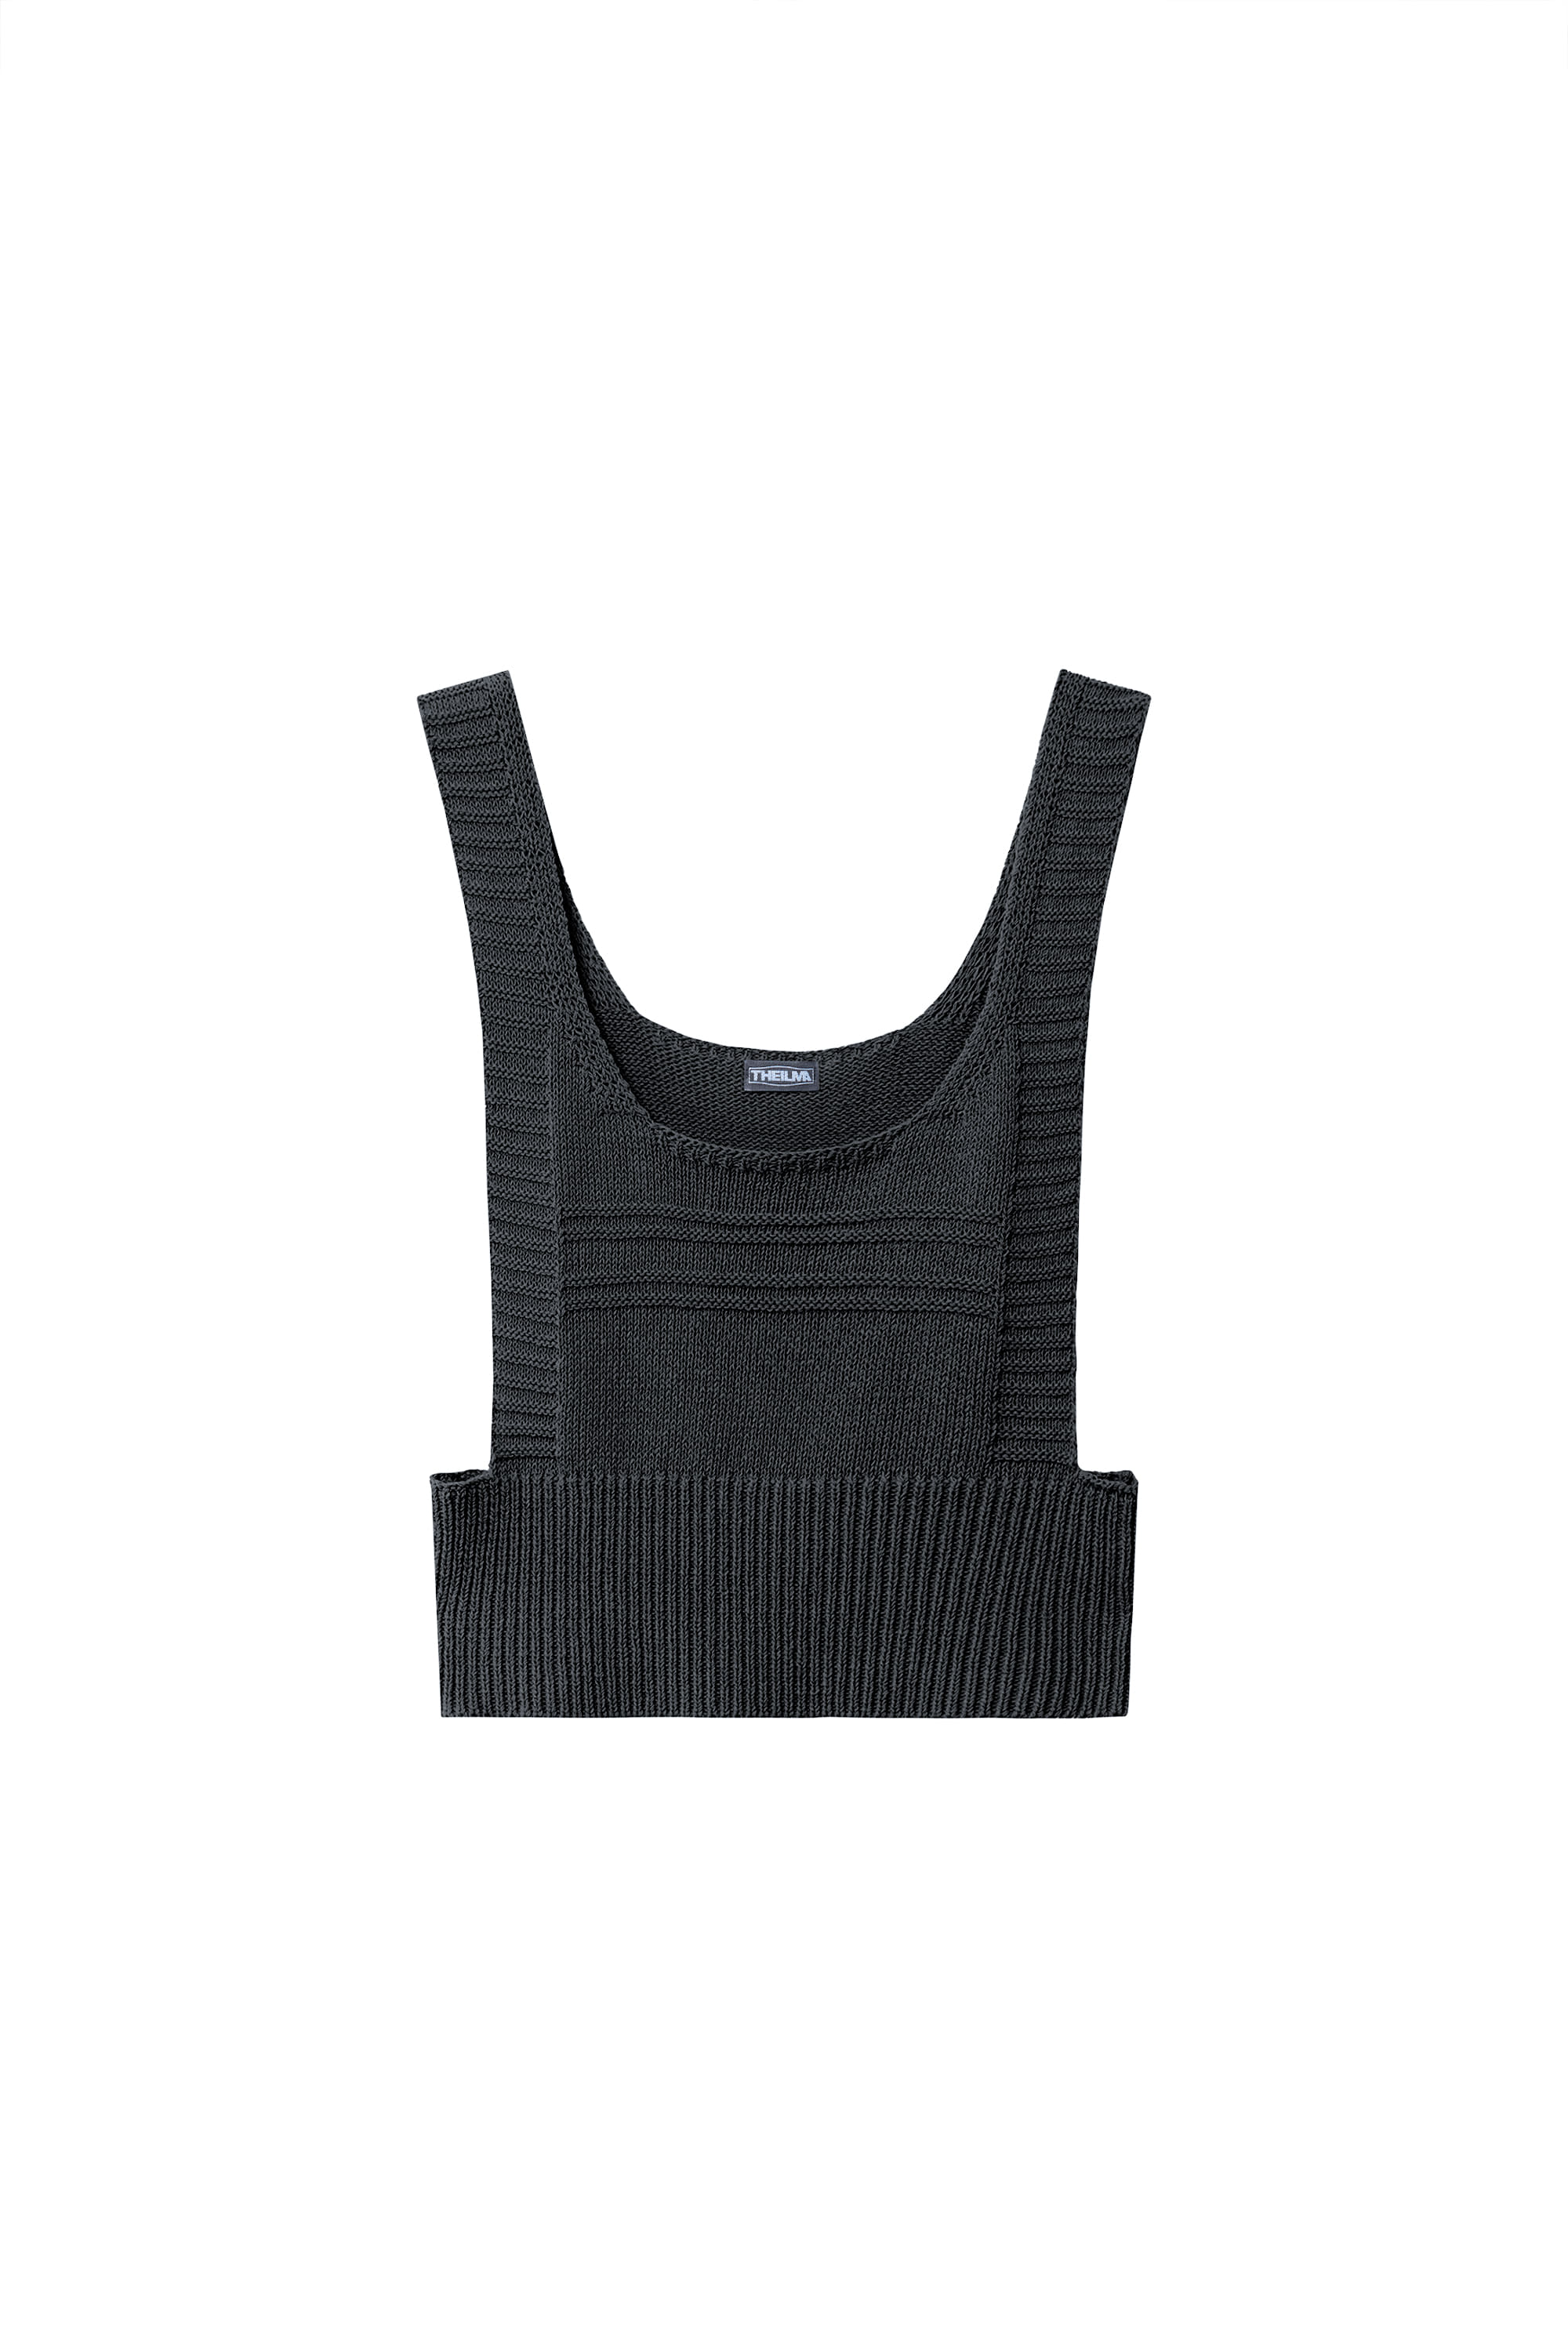 ODE LAYERED KNIT TOP CHARCOAL